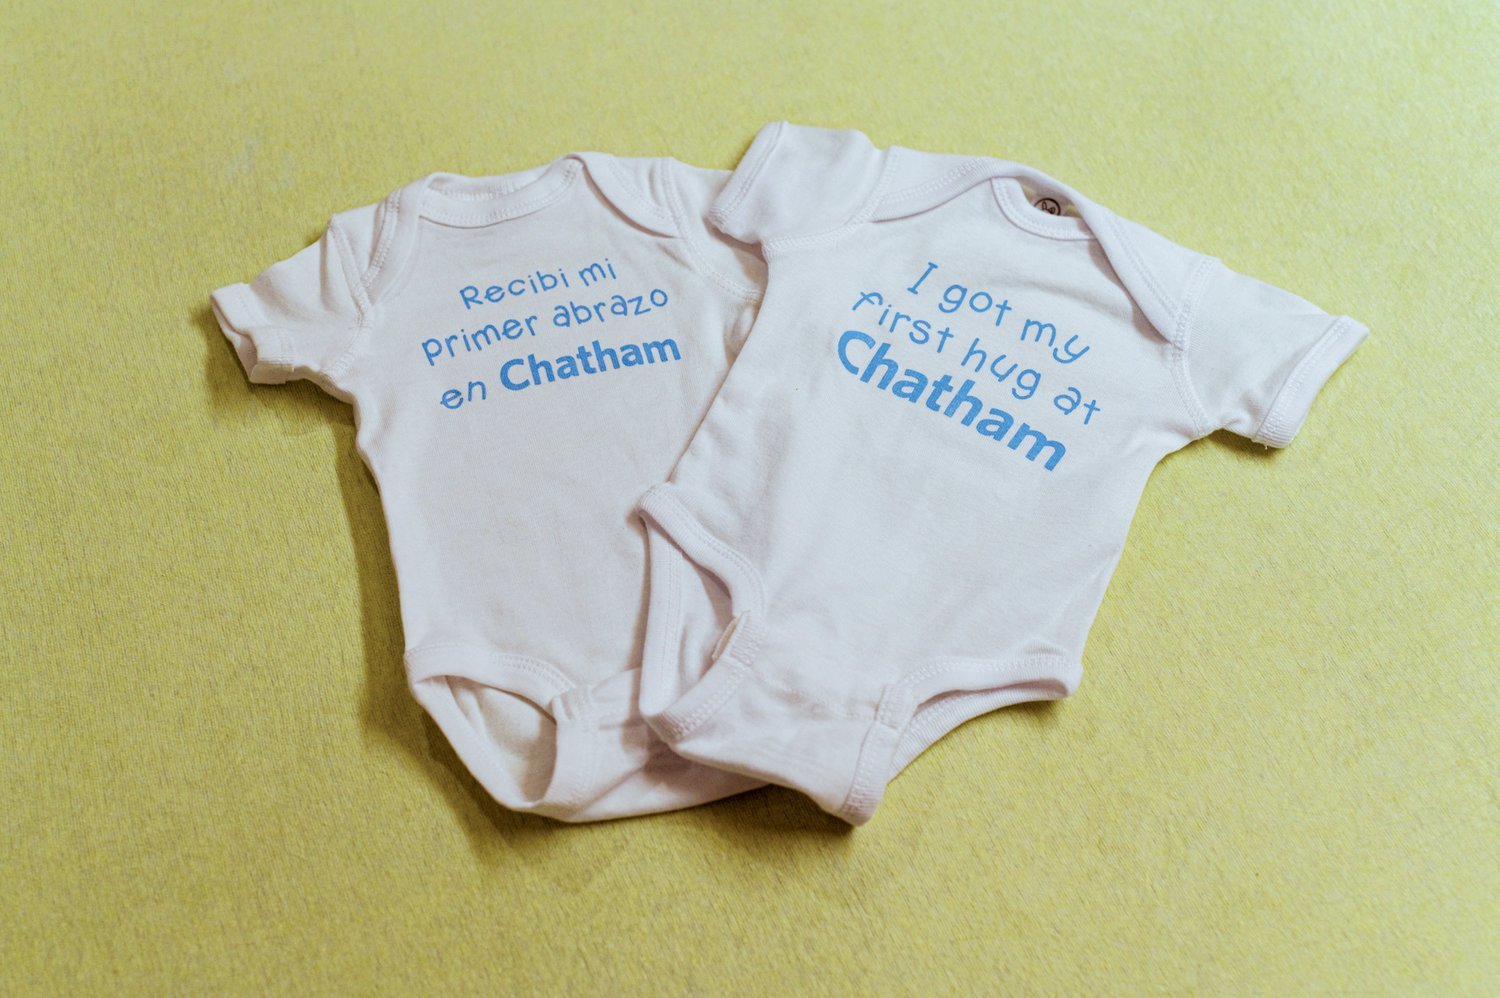 Before leaving the UNC Chatham Hospital Maternal Care Center, every newborn gets a onesie that says 'I got my first hug at Chatham' in English or Spanish.